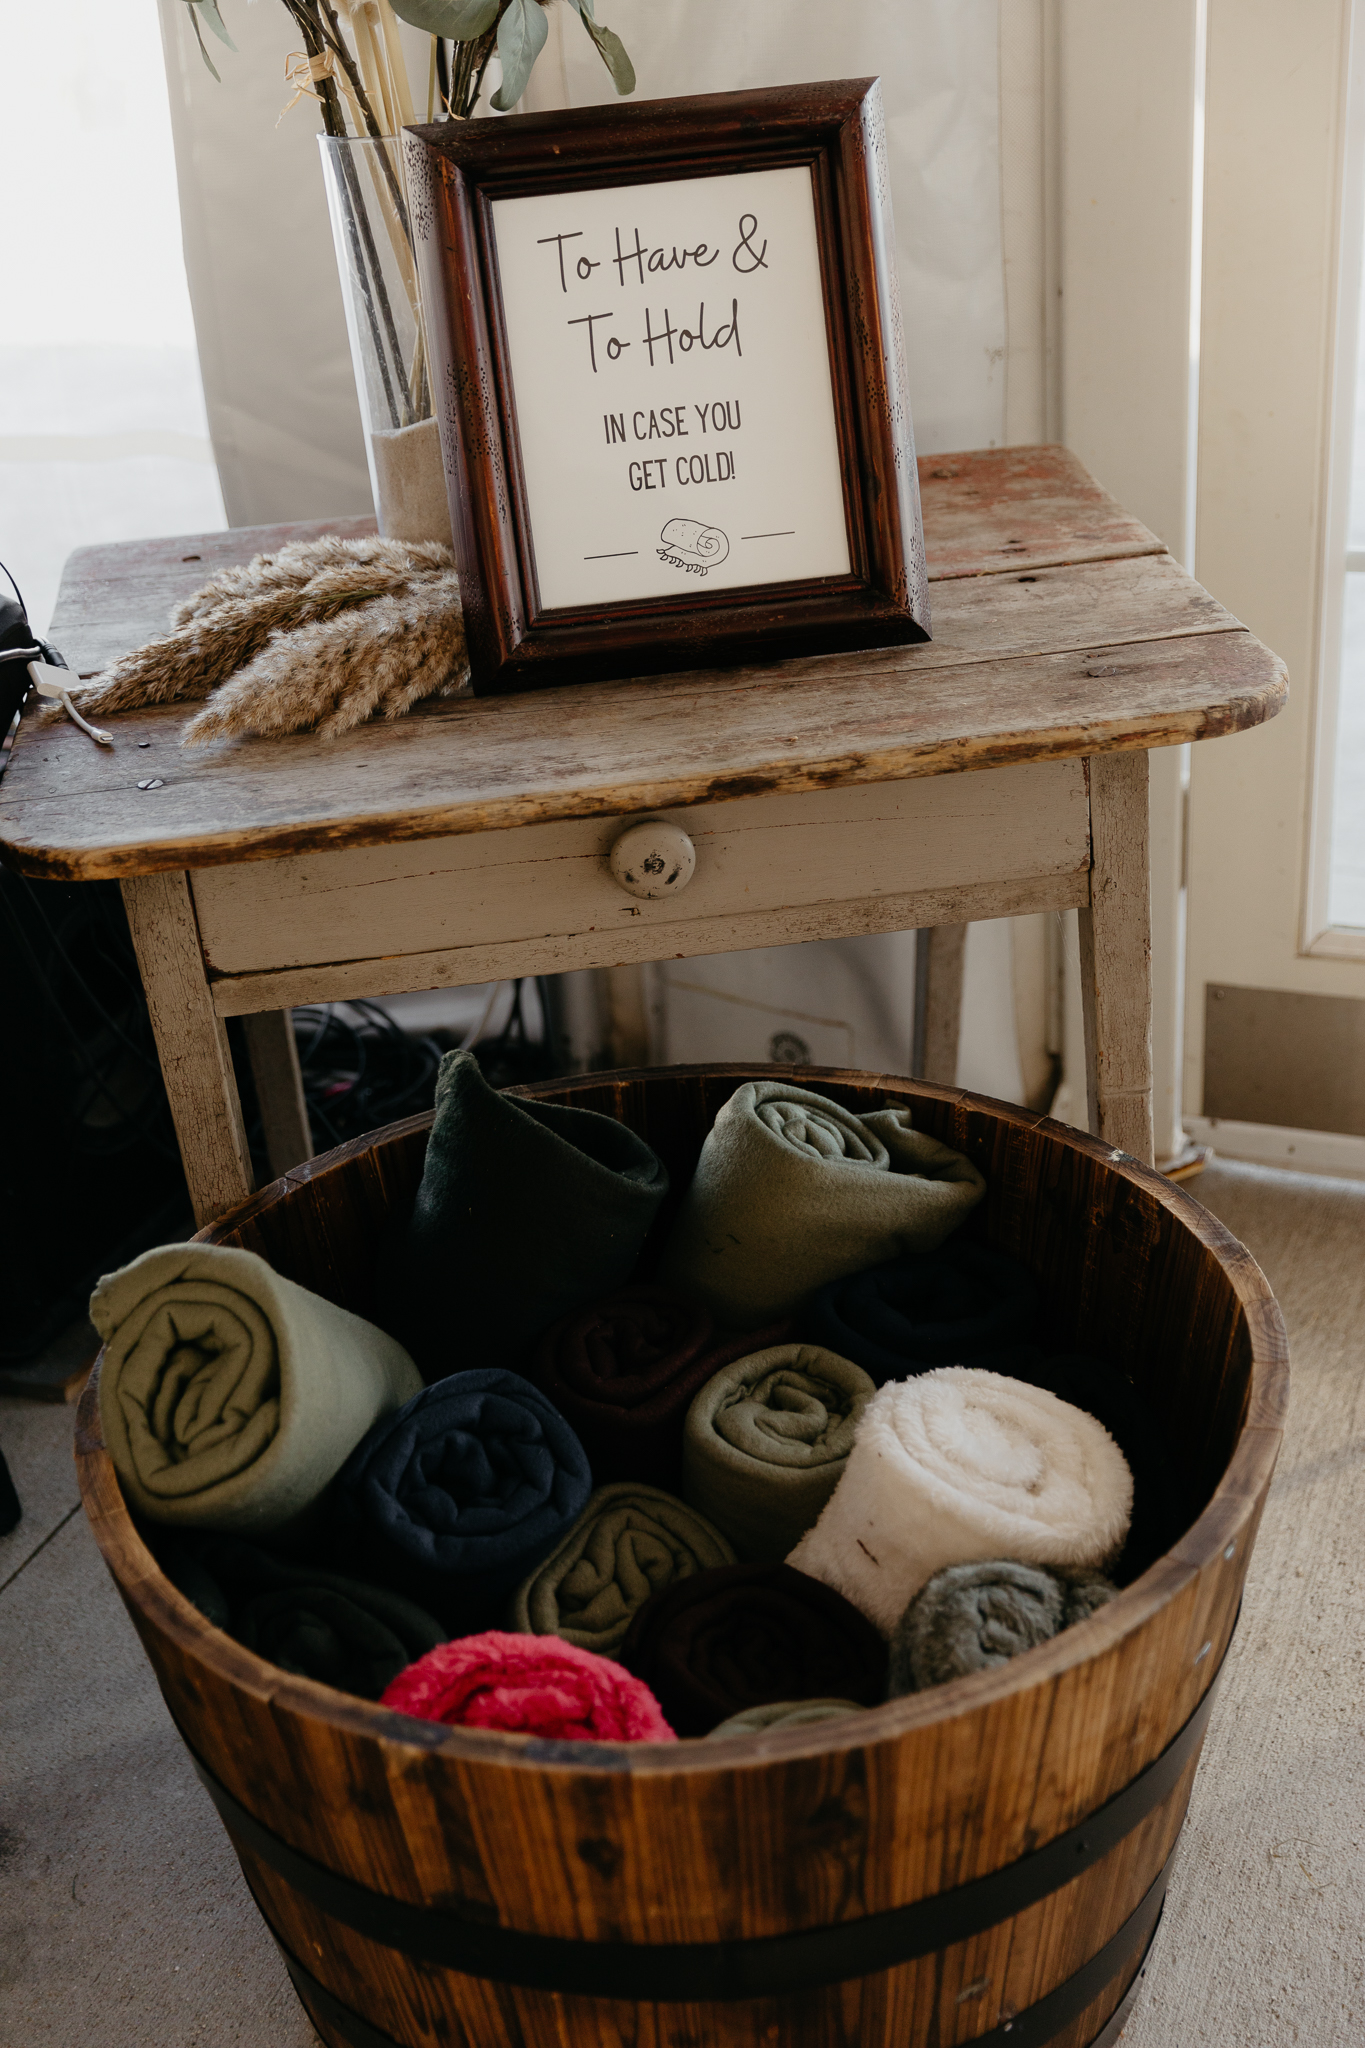 A bucket of blankets and sign that says to have and hold in case you get cold